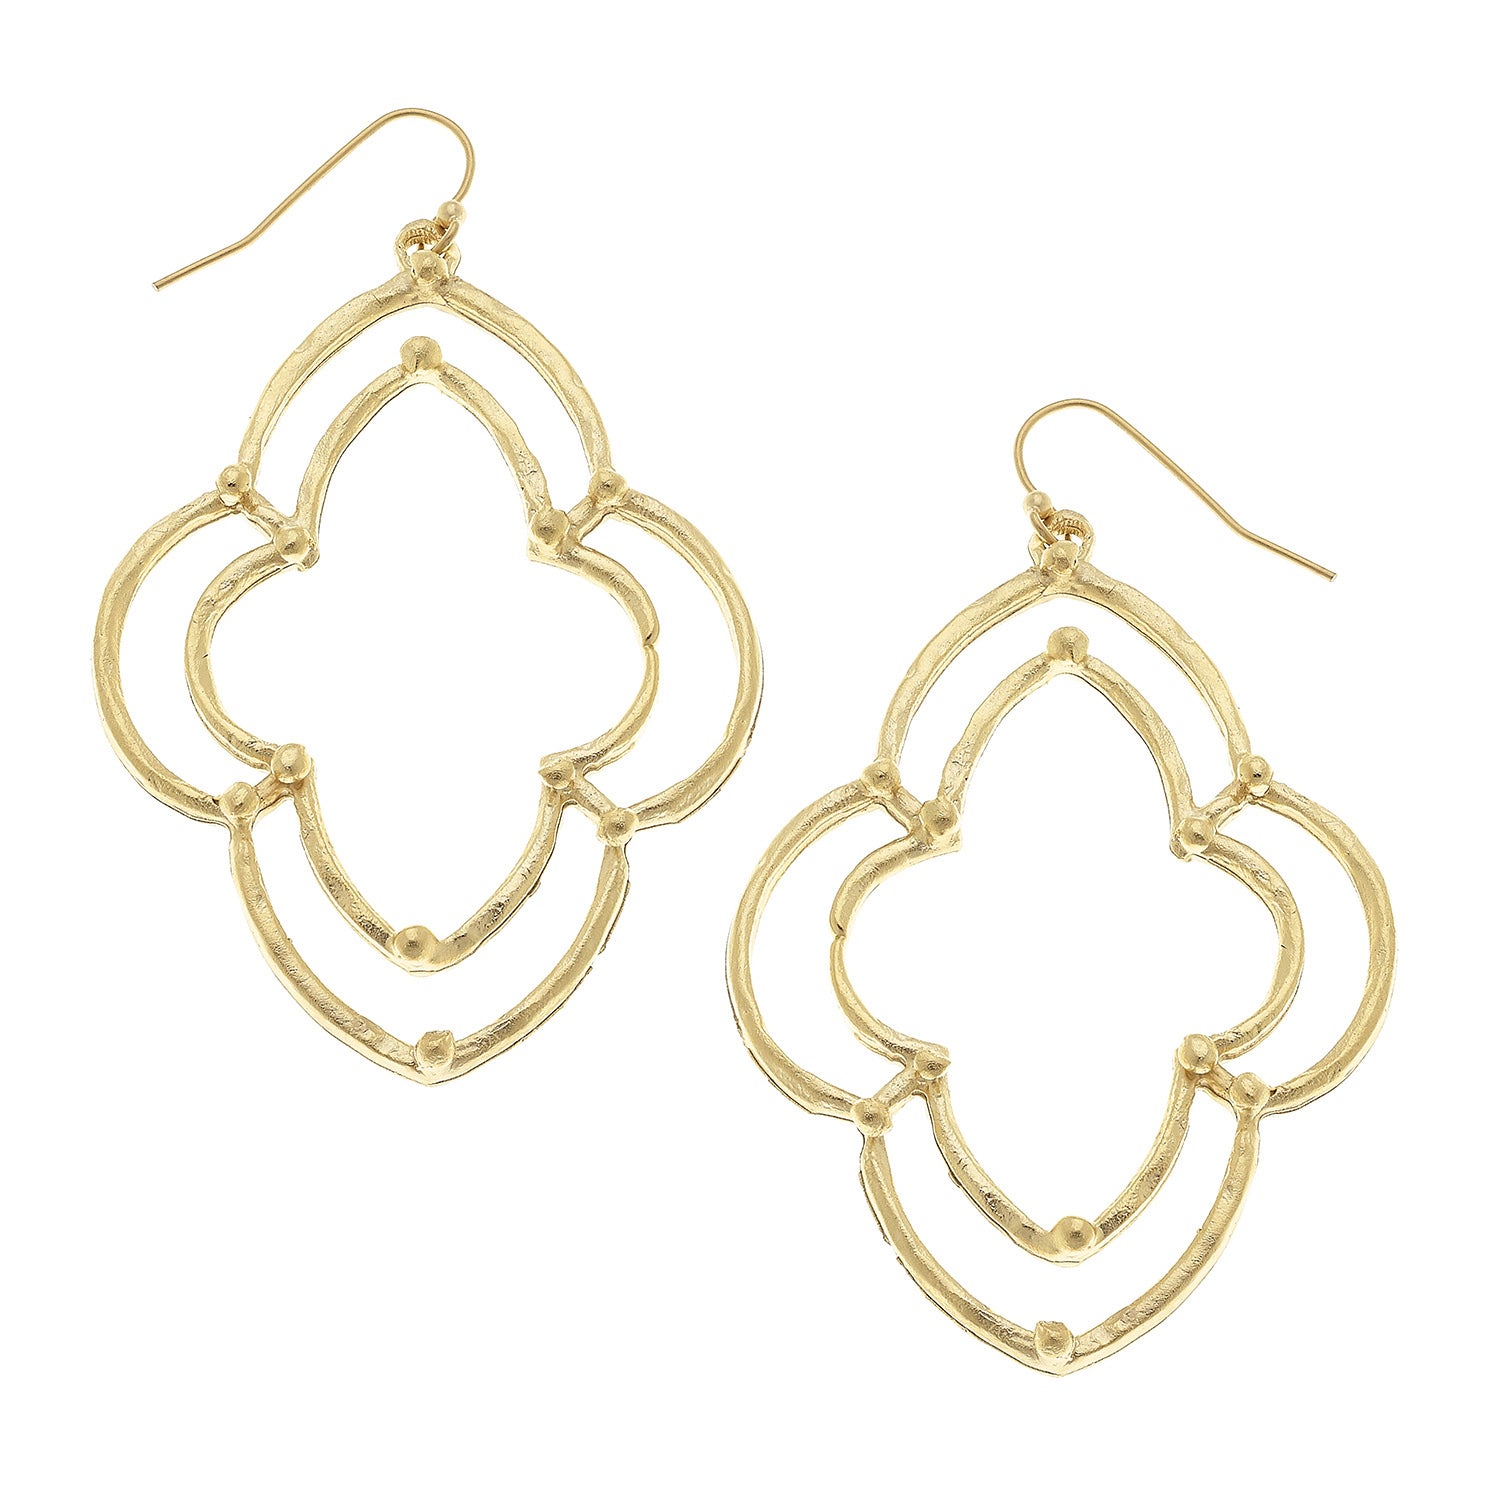 Susan Shaw Jewelry Dangle Earrings, Scalloped Clover in Gold